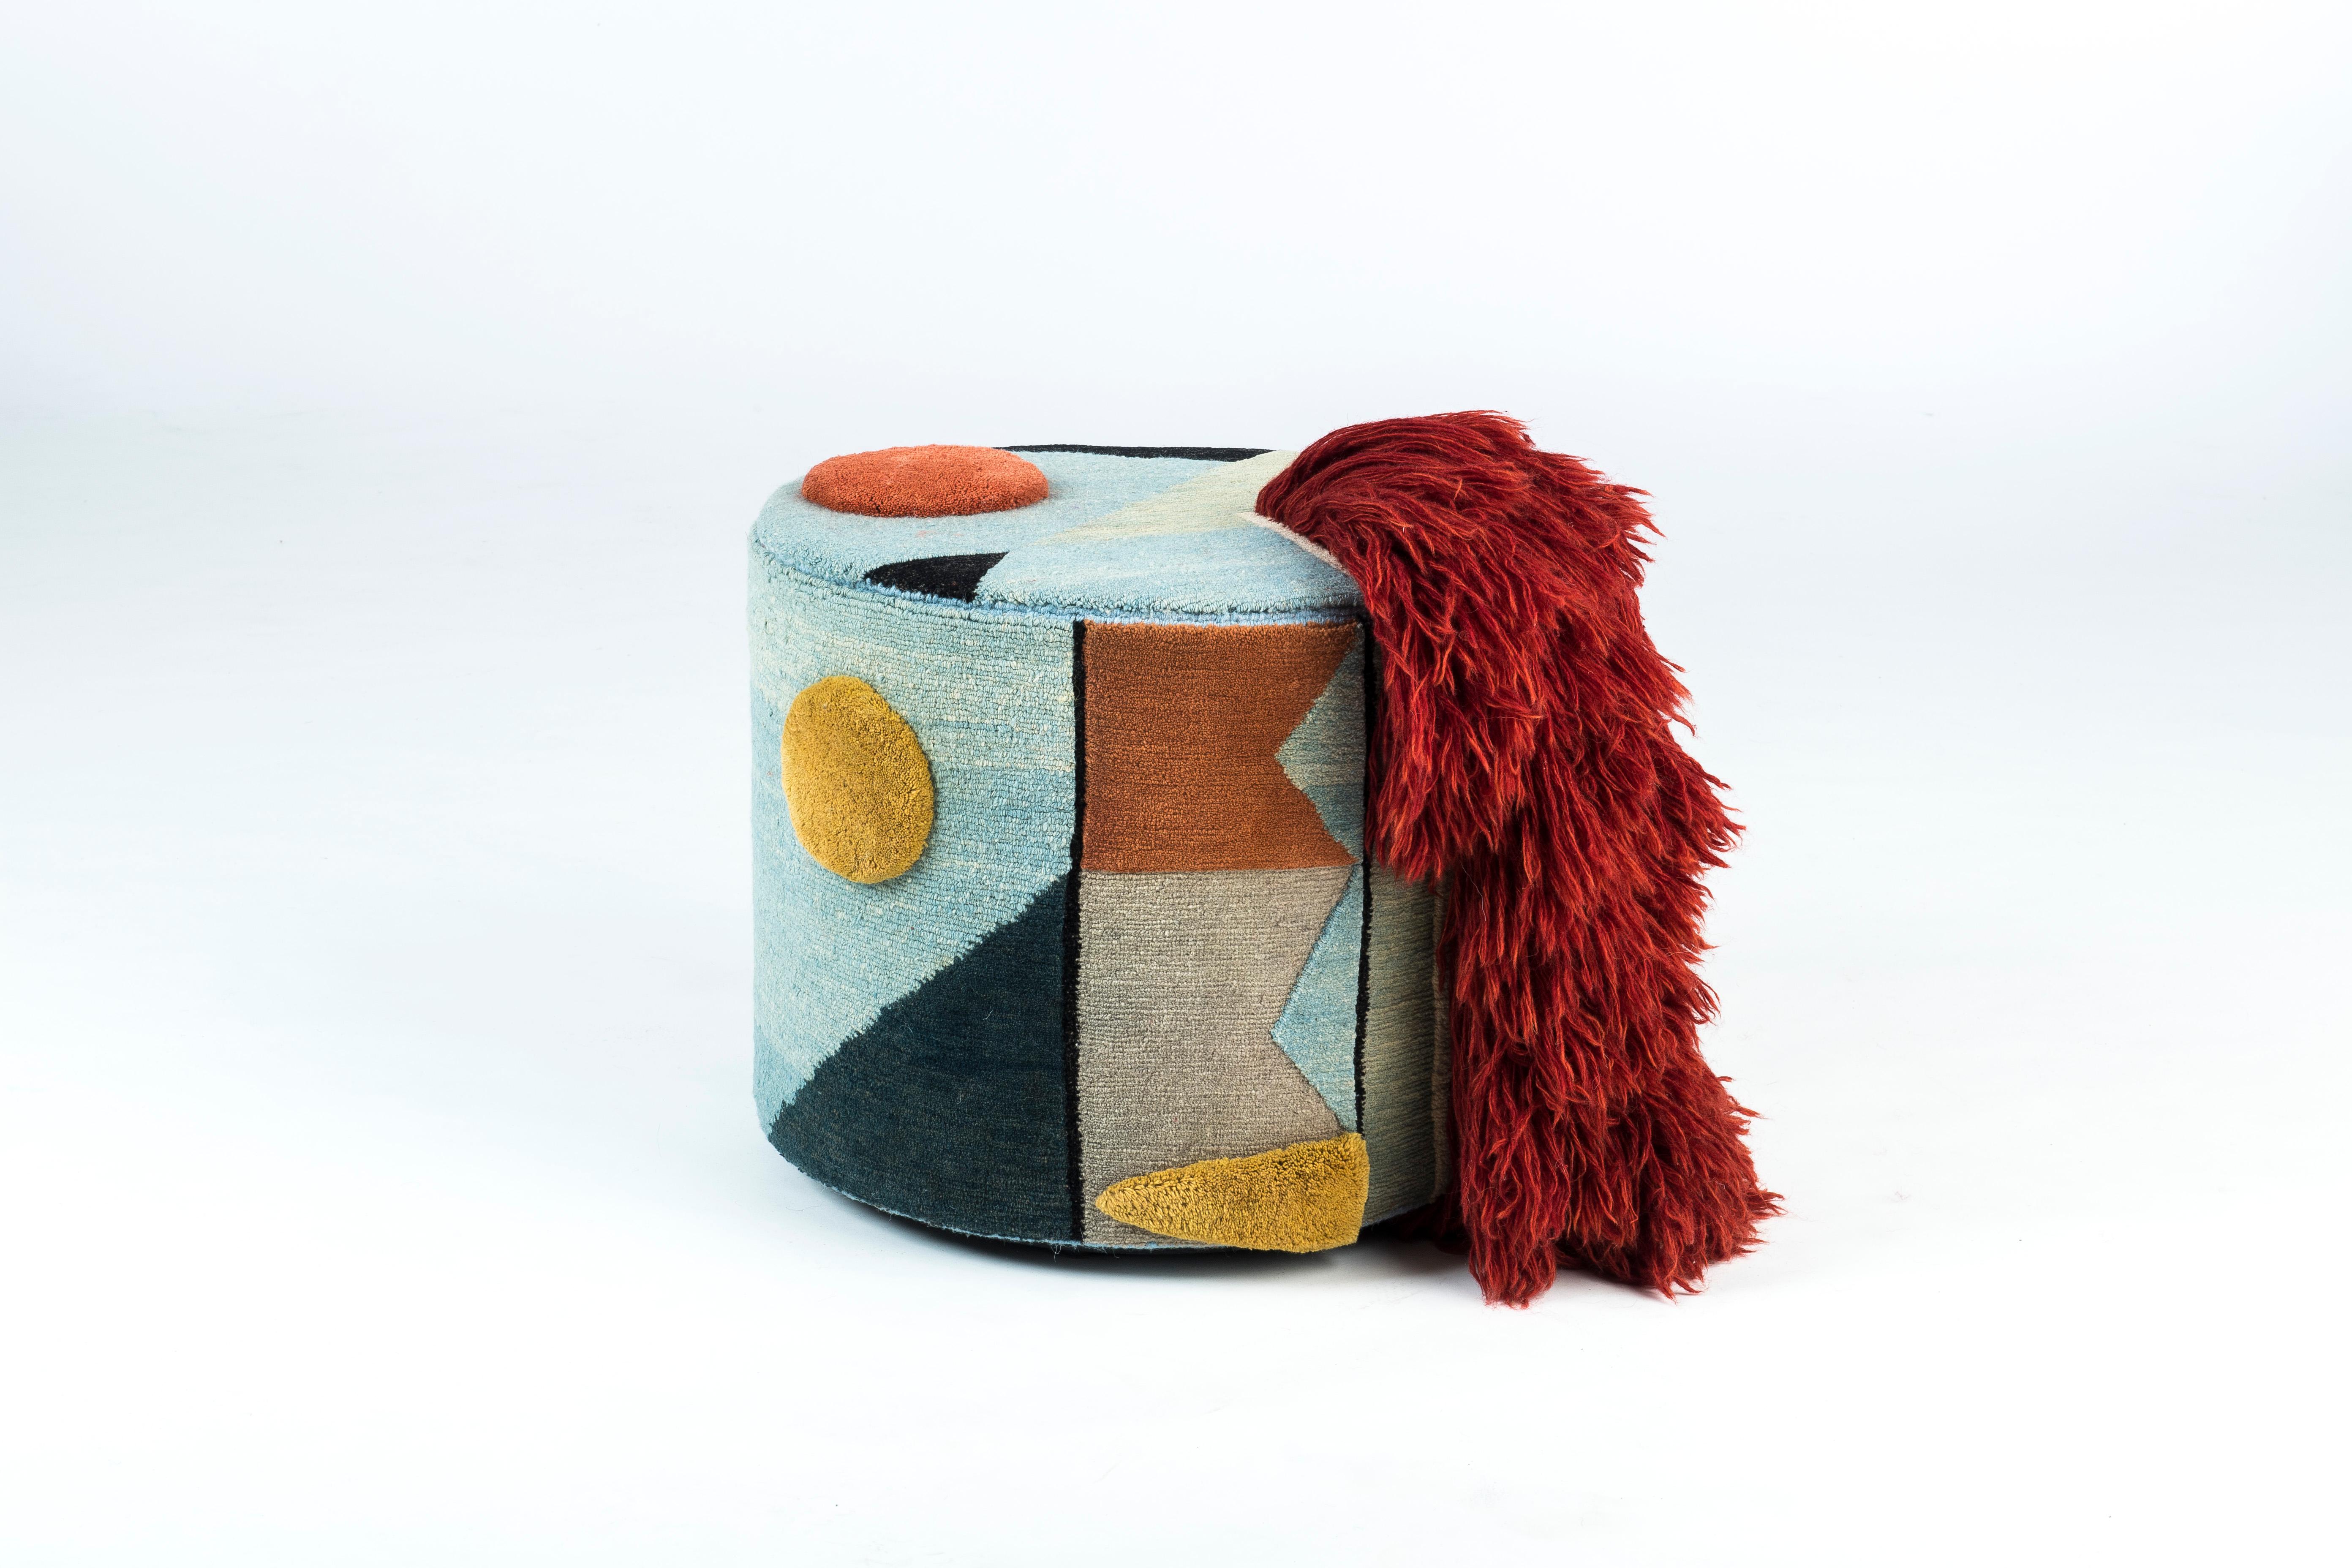 Pouf Charaktere Massimiliano by Lyk Carpet
Dimensions: Ø 53 x H 47 cm.
Materials: 100% tibetan highland-wool, new pure hand-combed and hand-spun wool, natural vegetable-dyed wool, 100 knots per square inch.
Hand-knotted. Each object is